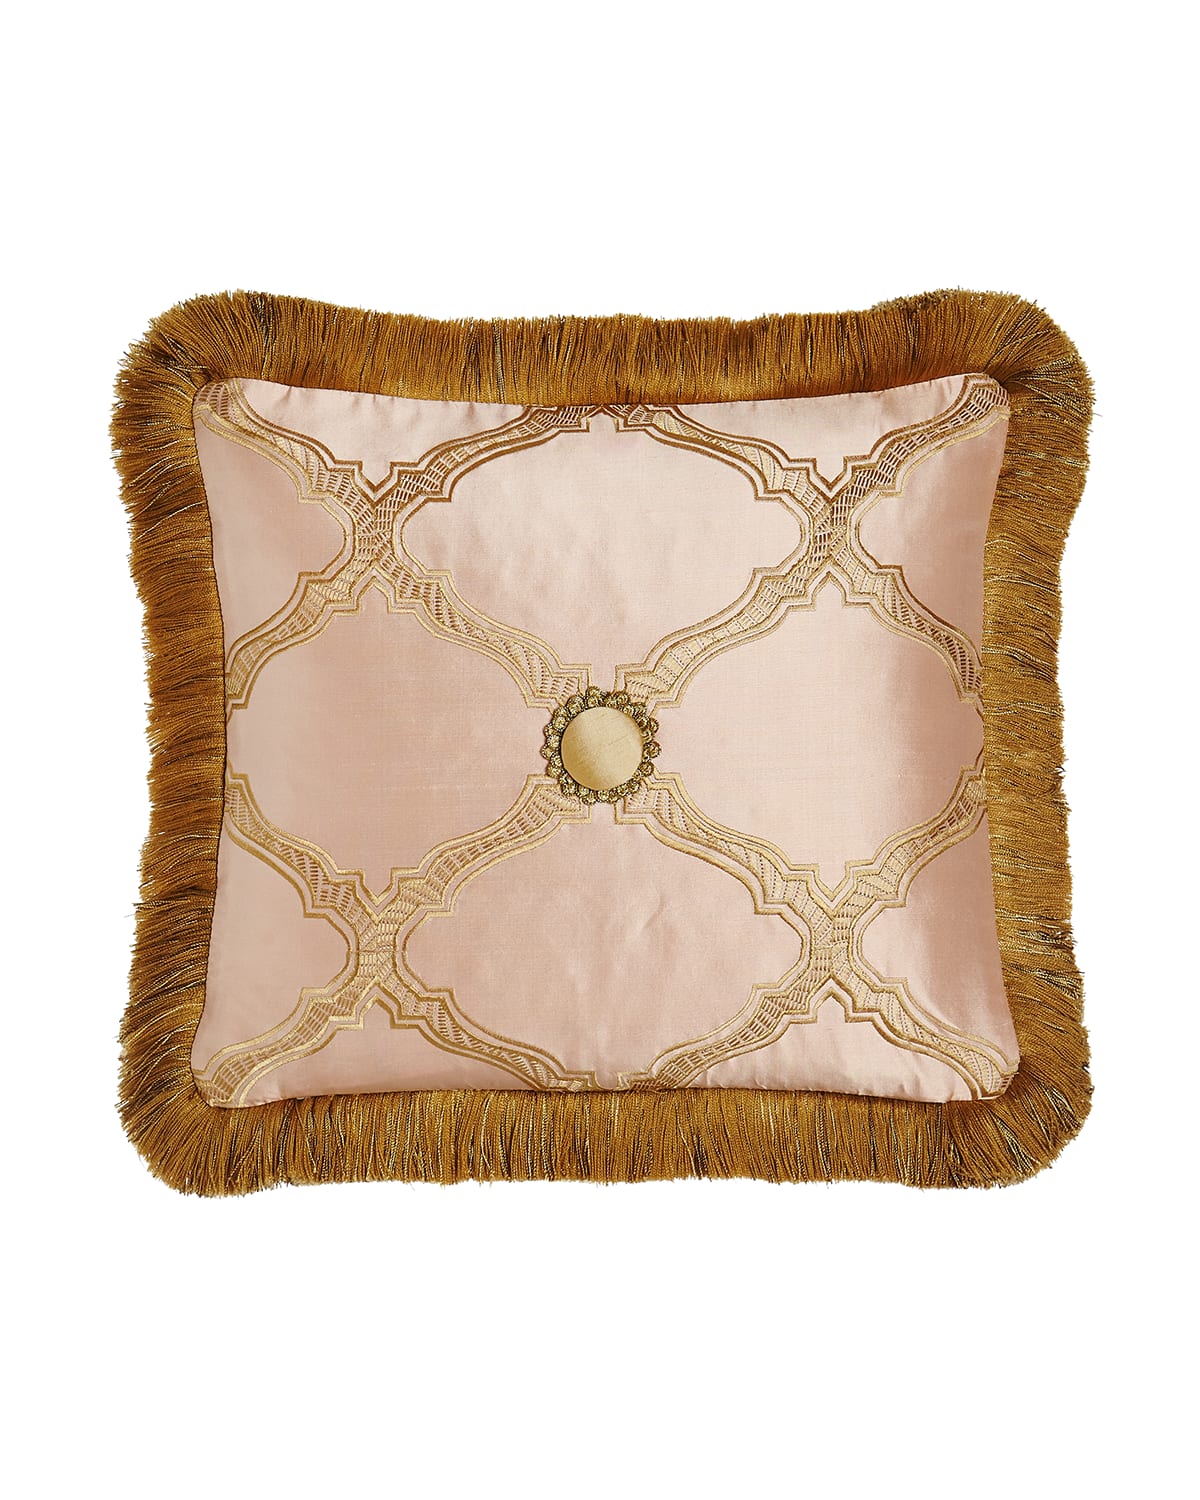 Image Sweet Dreams Versailles Reversible Pillow with Fringe, 15" x 14"